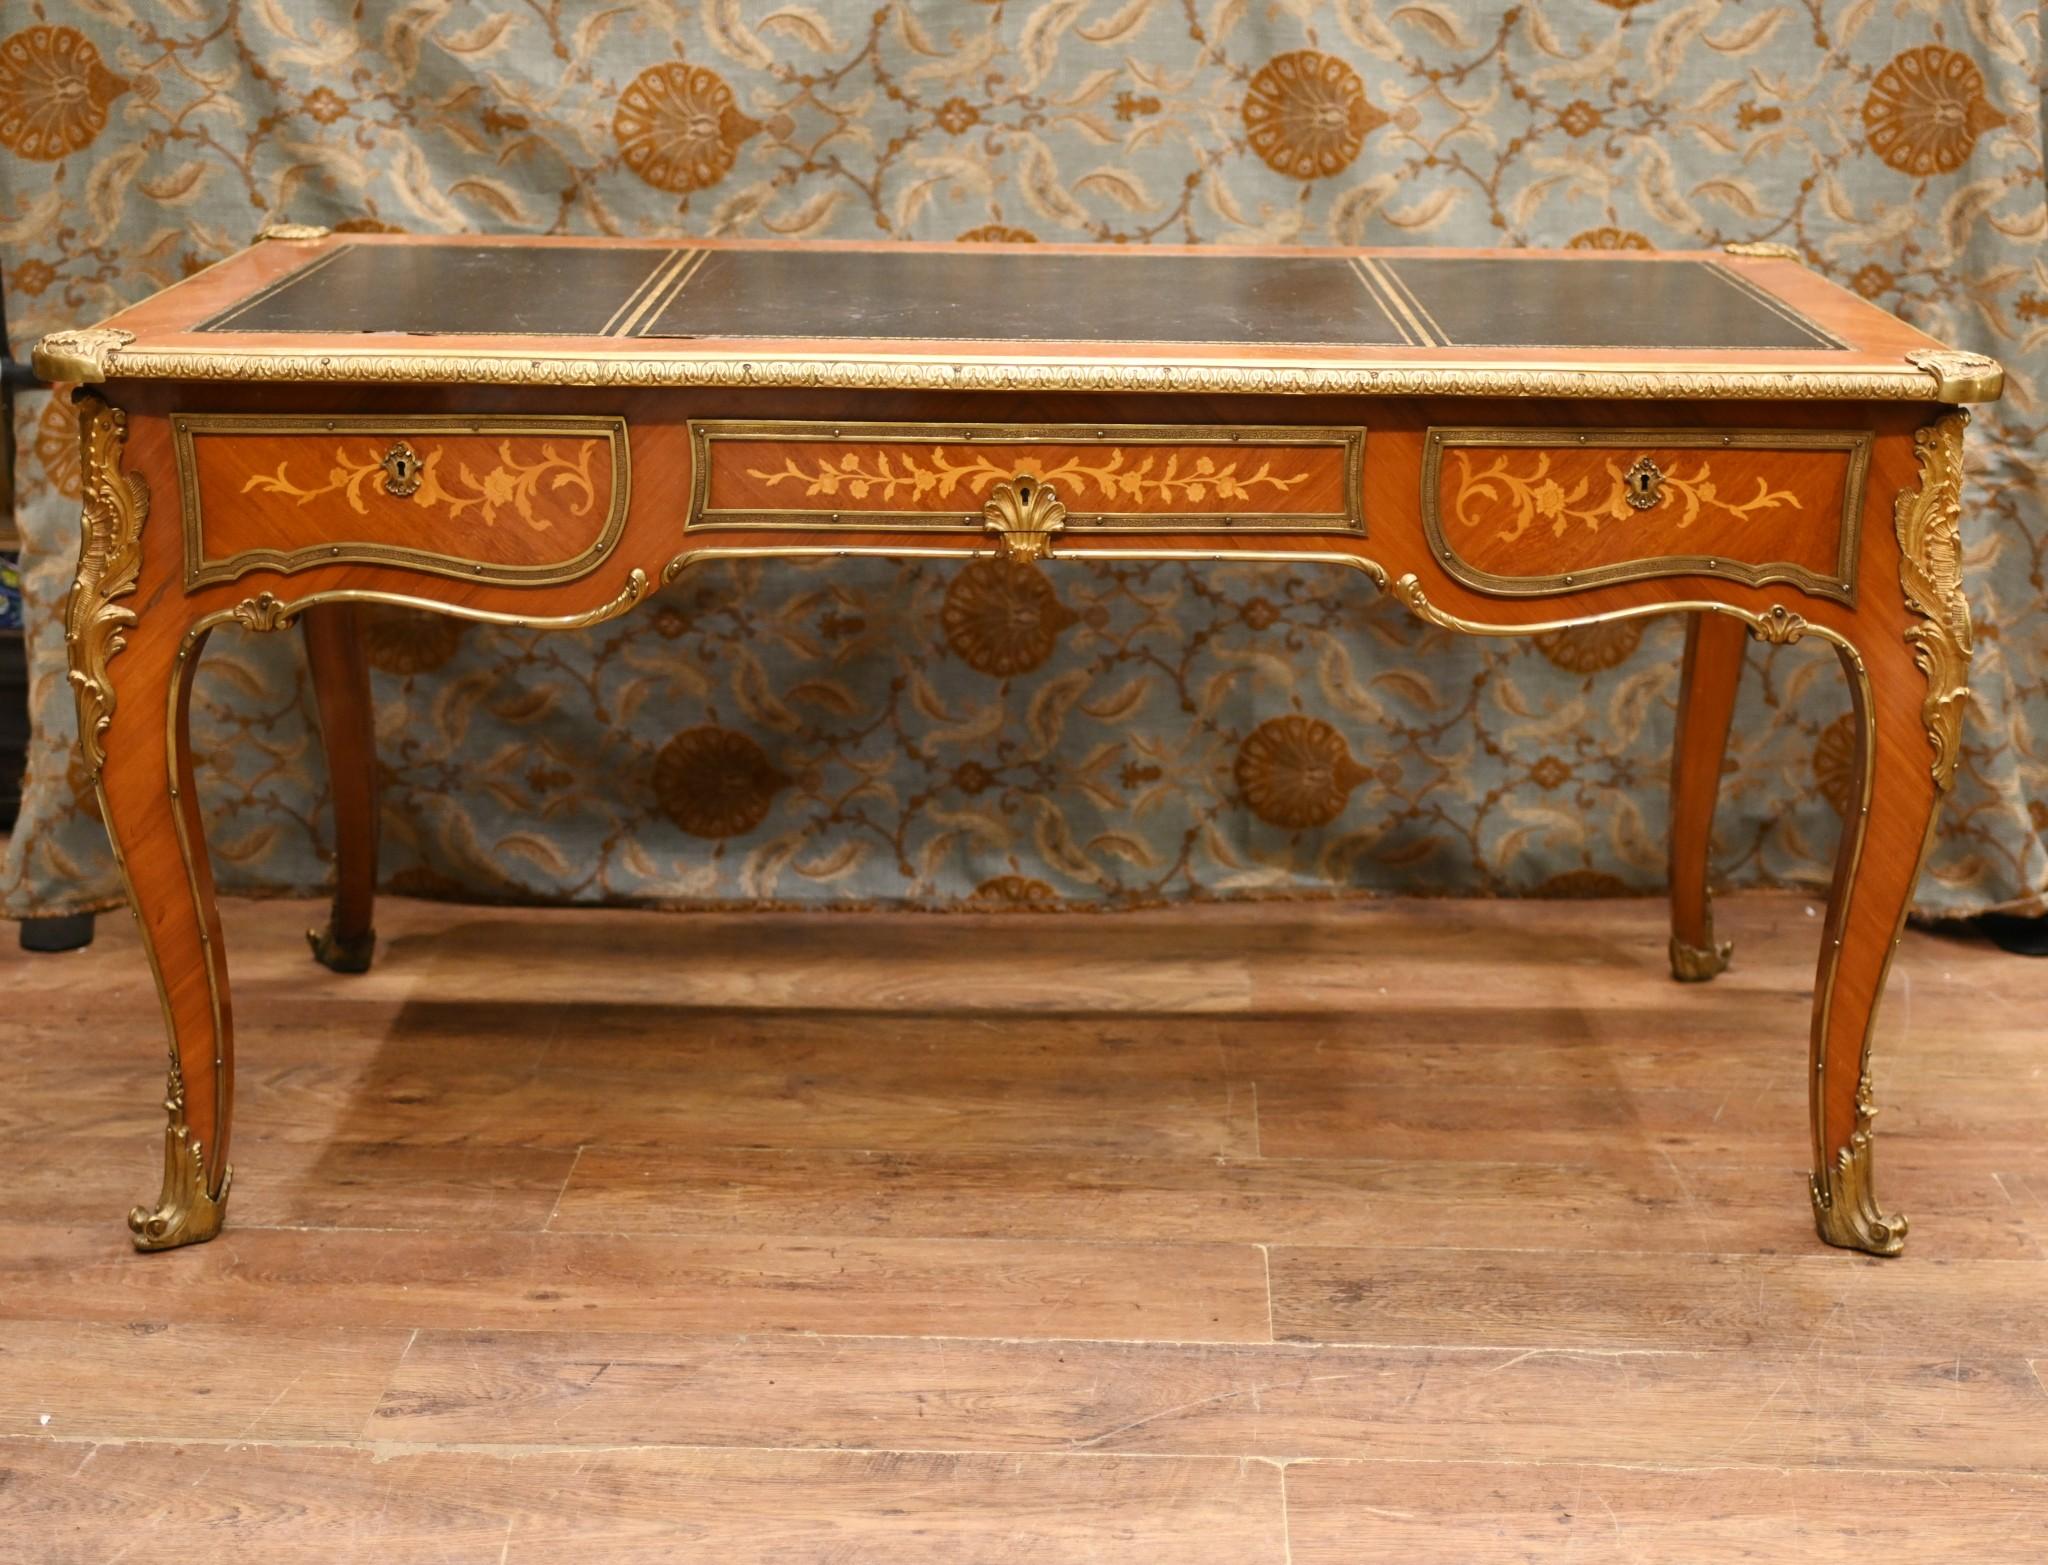 Quality antique French desk or bureau plat
Classic look crafted from kingwood with original ormolu fixtures
Good size at five feet - 154 CM - wide
Great for a home office set up
Bought from a dealer on Rue de Rossiers at Paris antiques